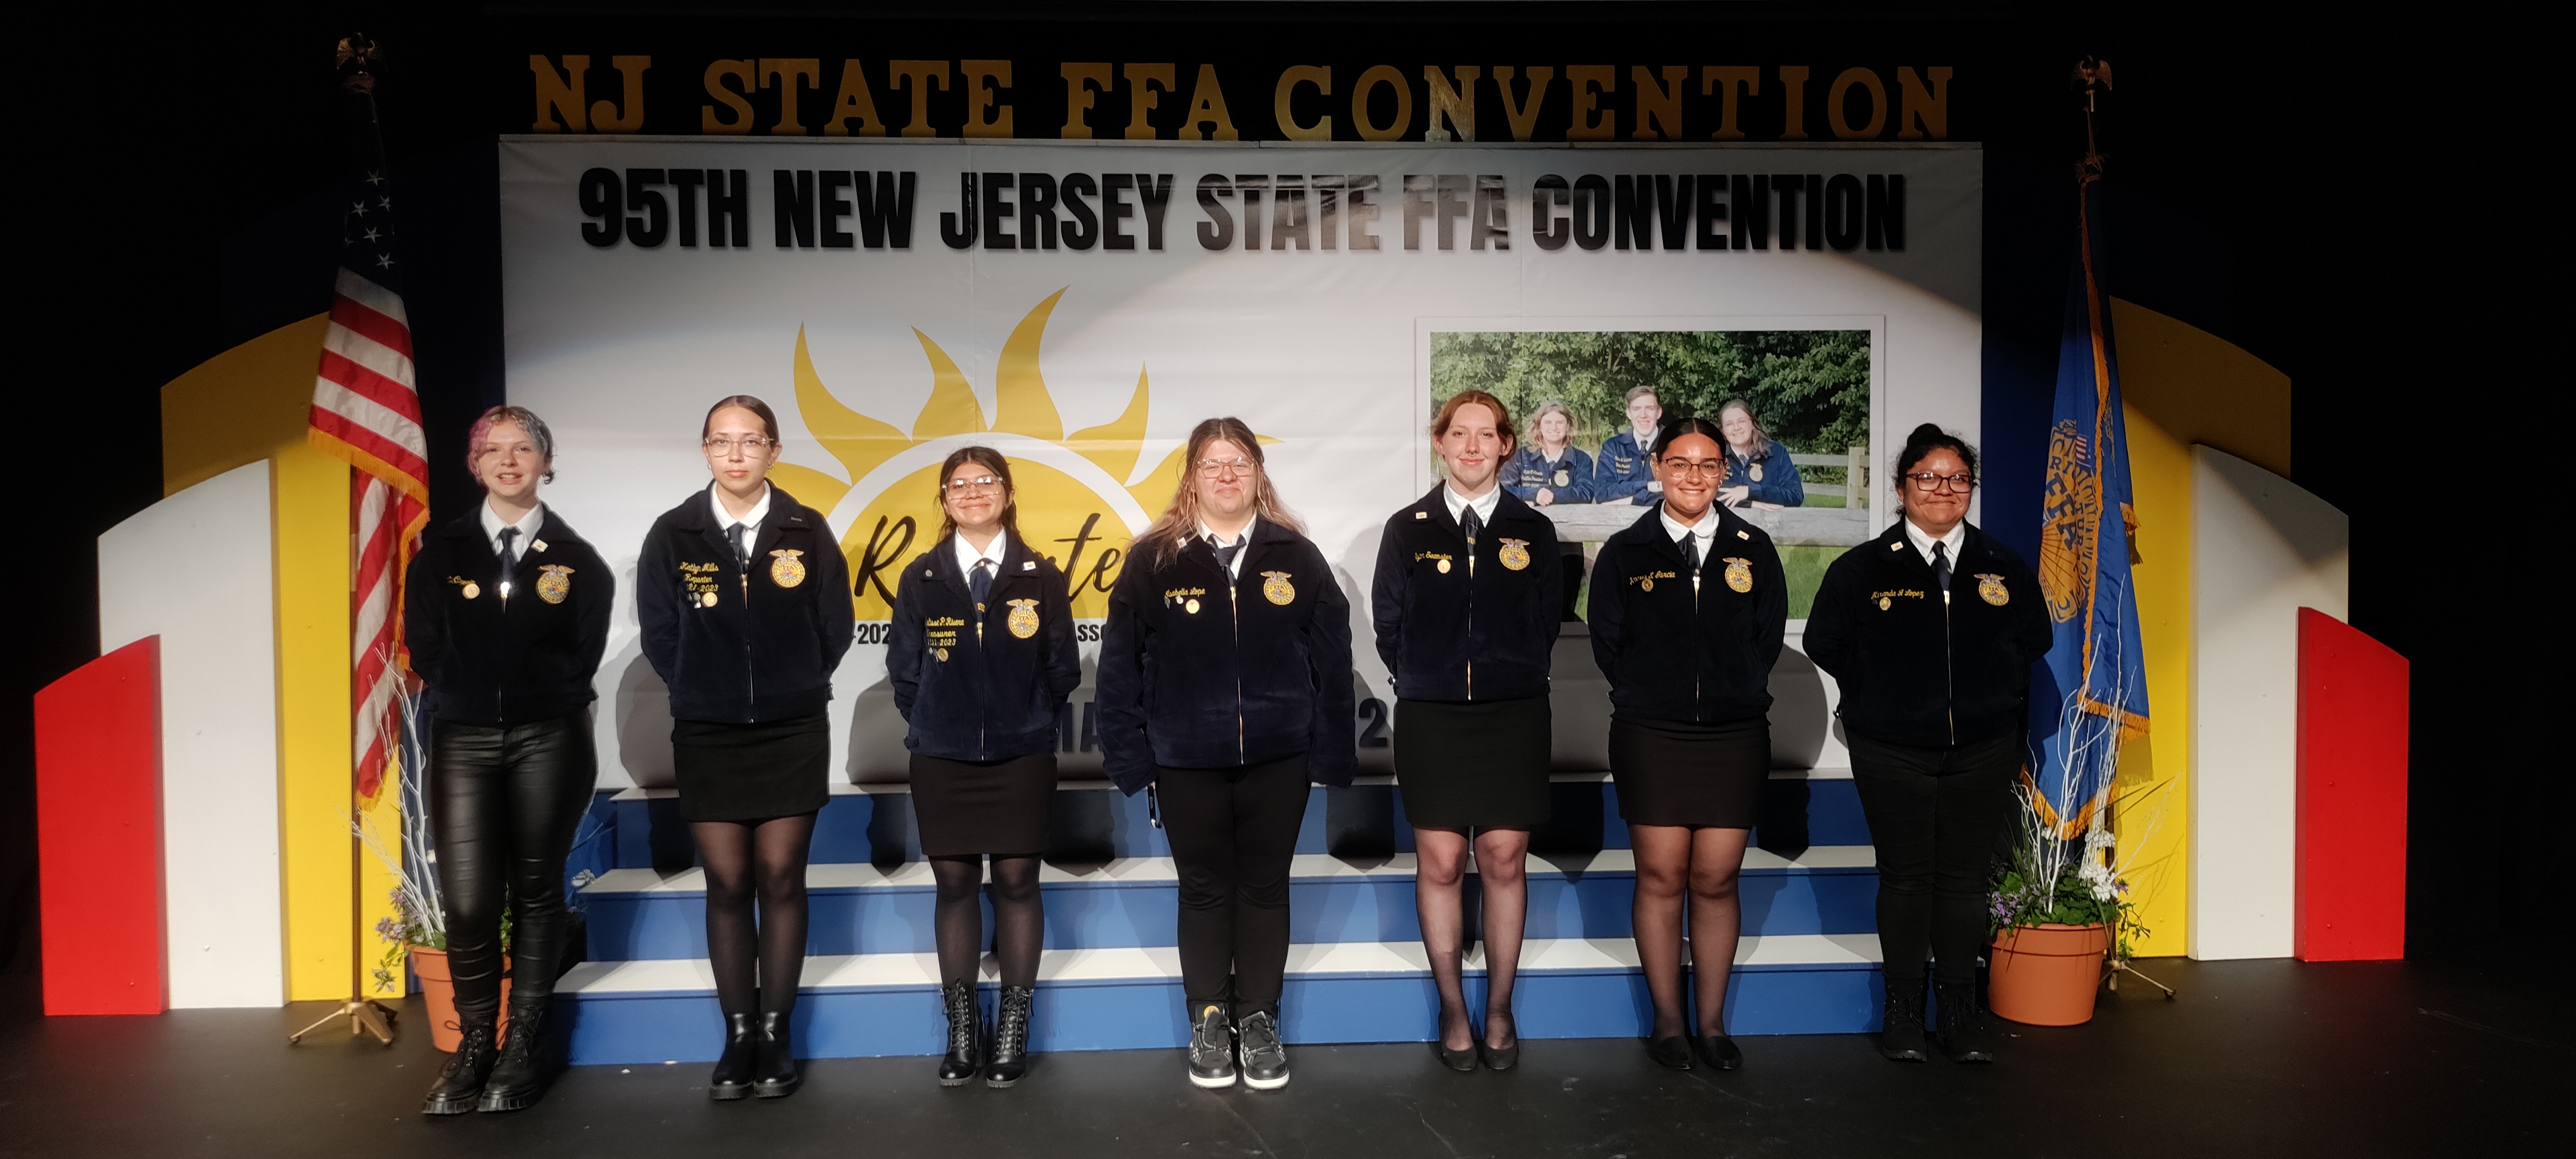 FFA members with the awards that our chapter won during the 95th NJ FFA State Convention. 